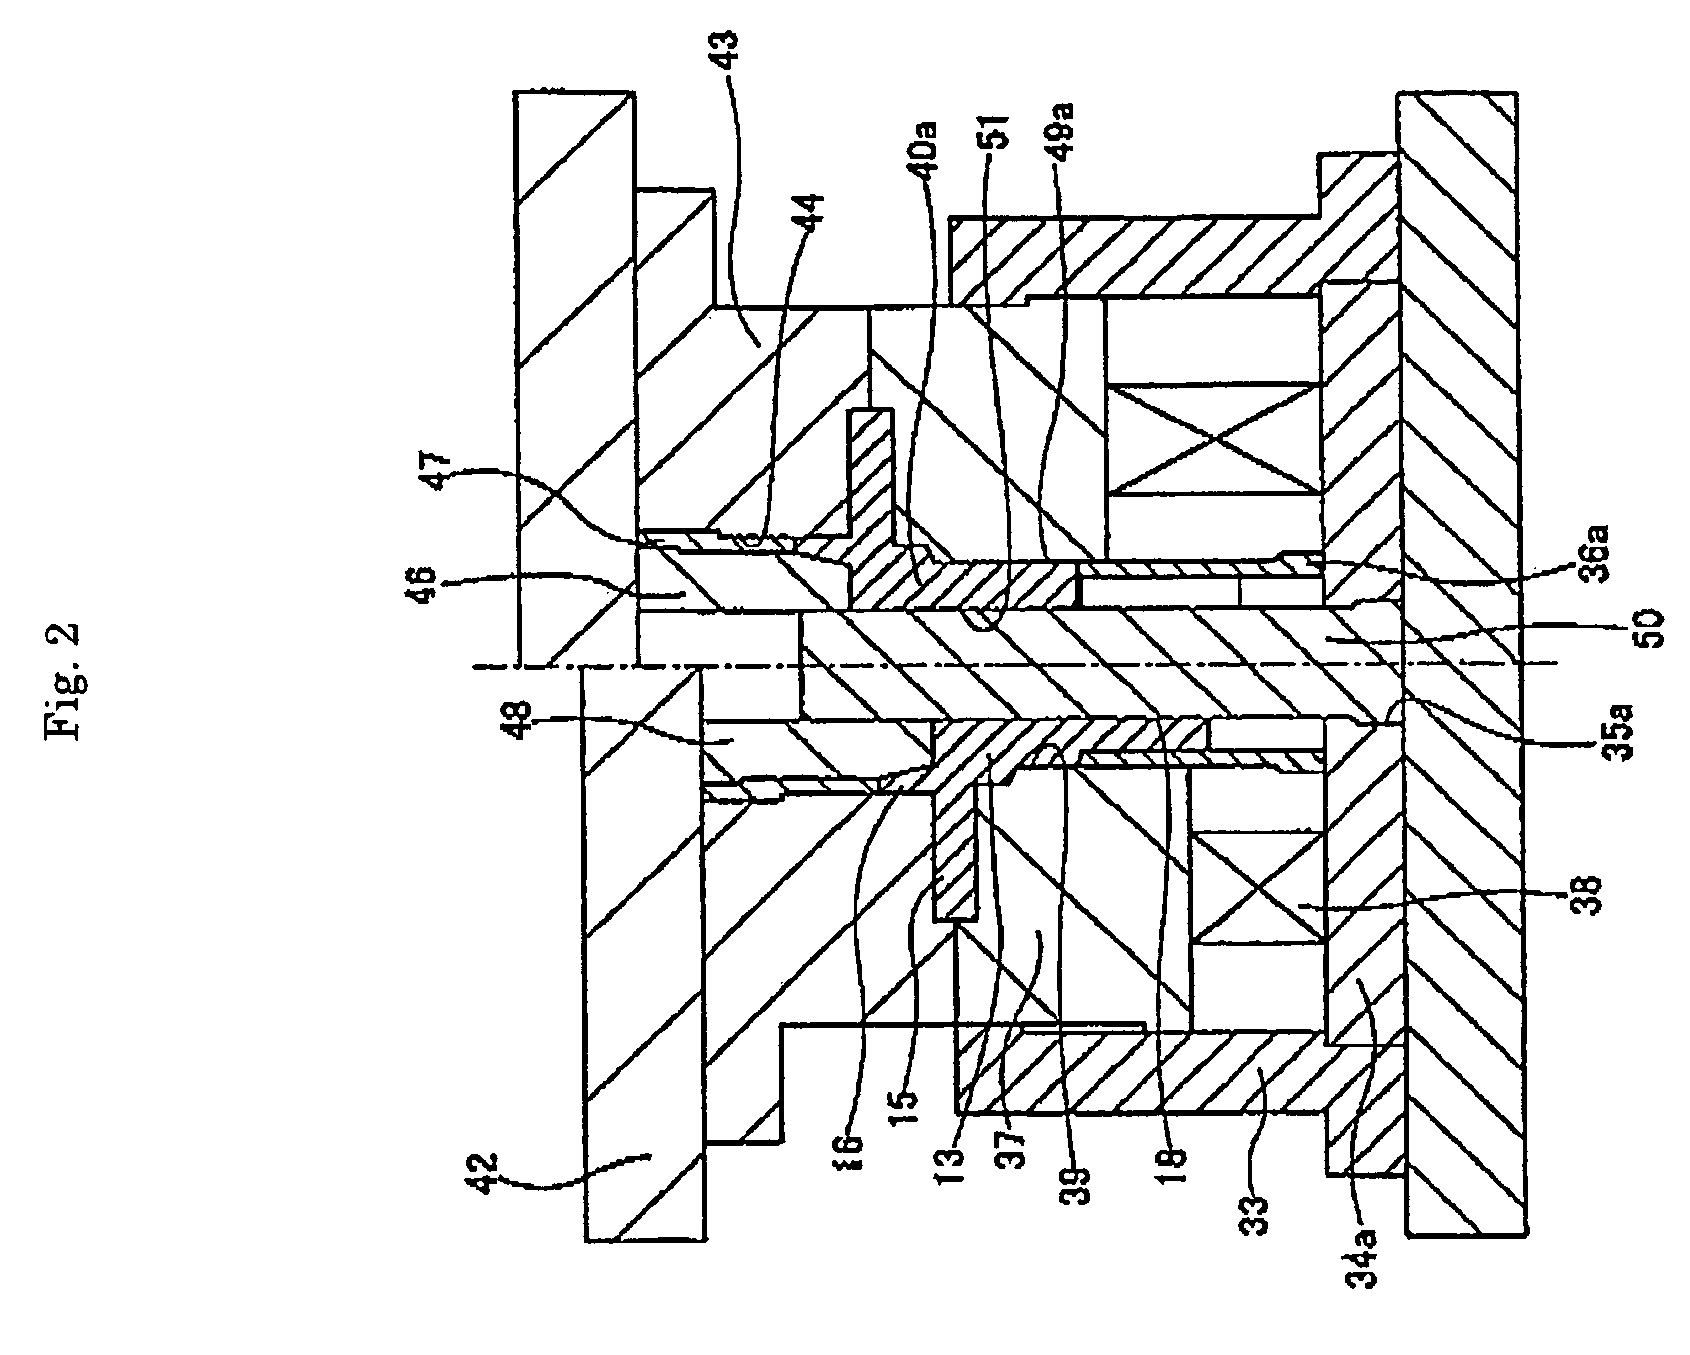 Process for manufacturing a bearing ring member as a constituent of a rolling bearing unit for wheel support